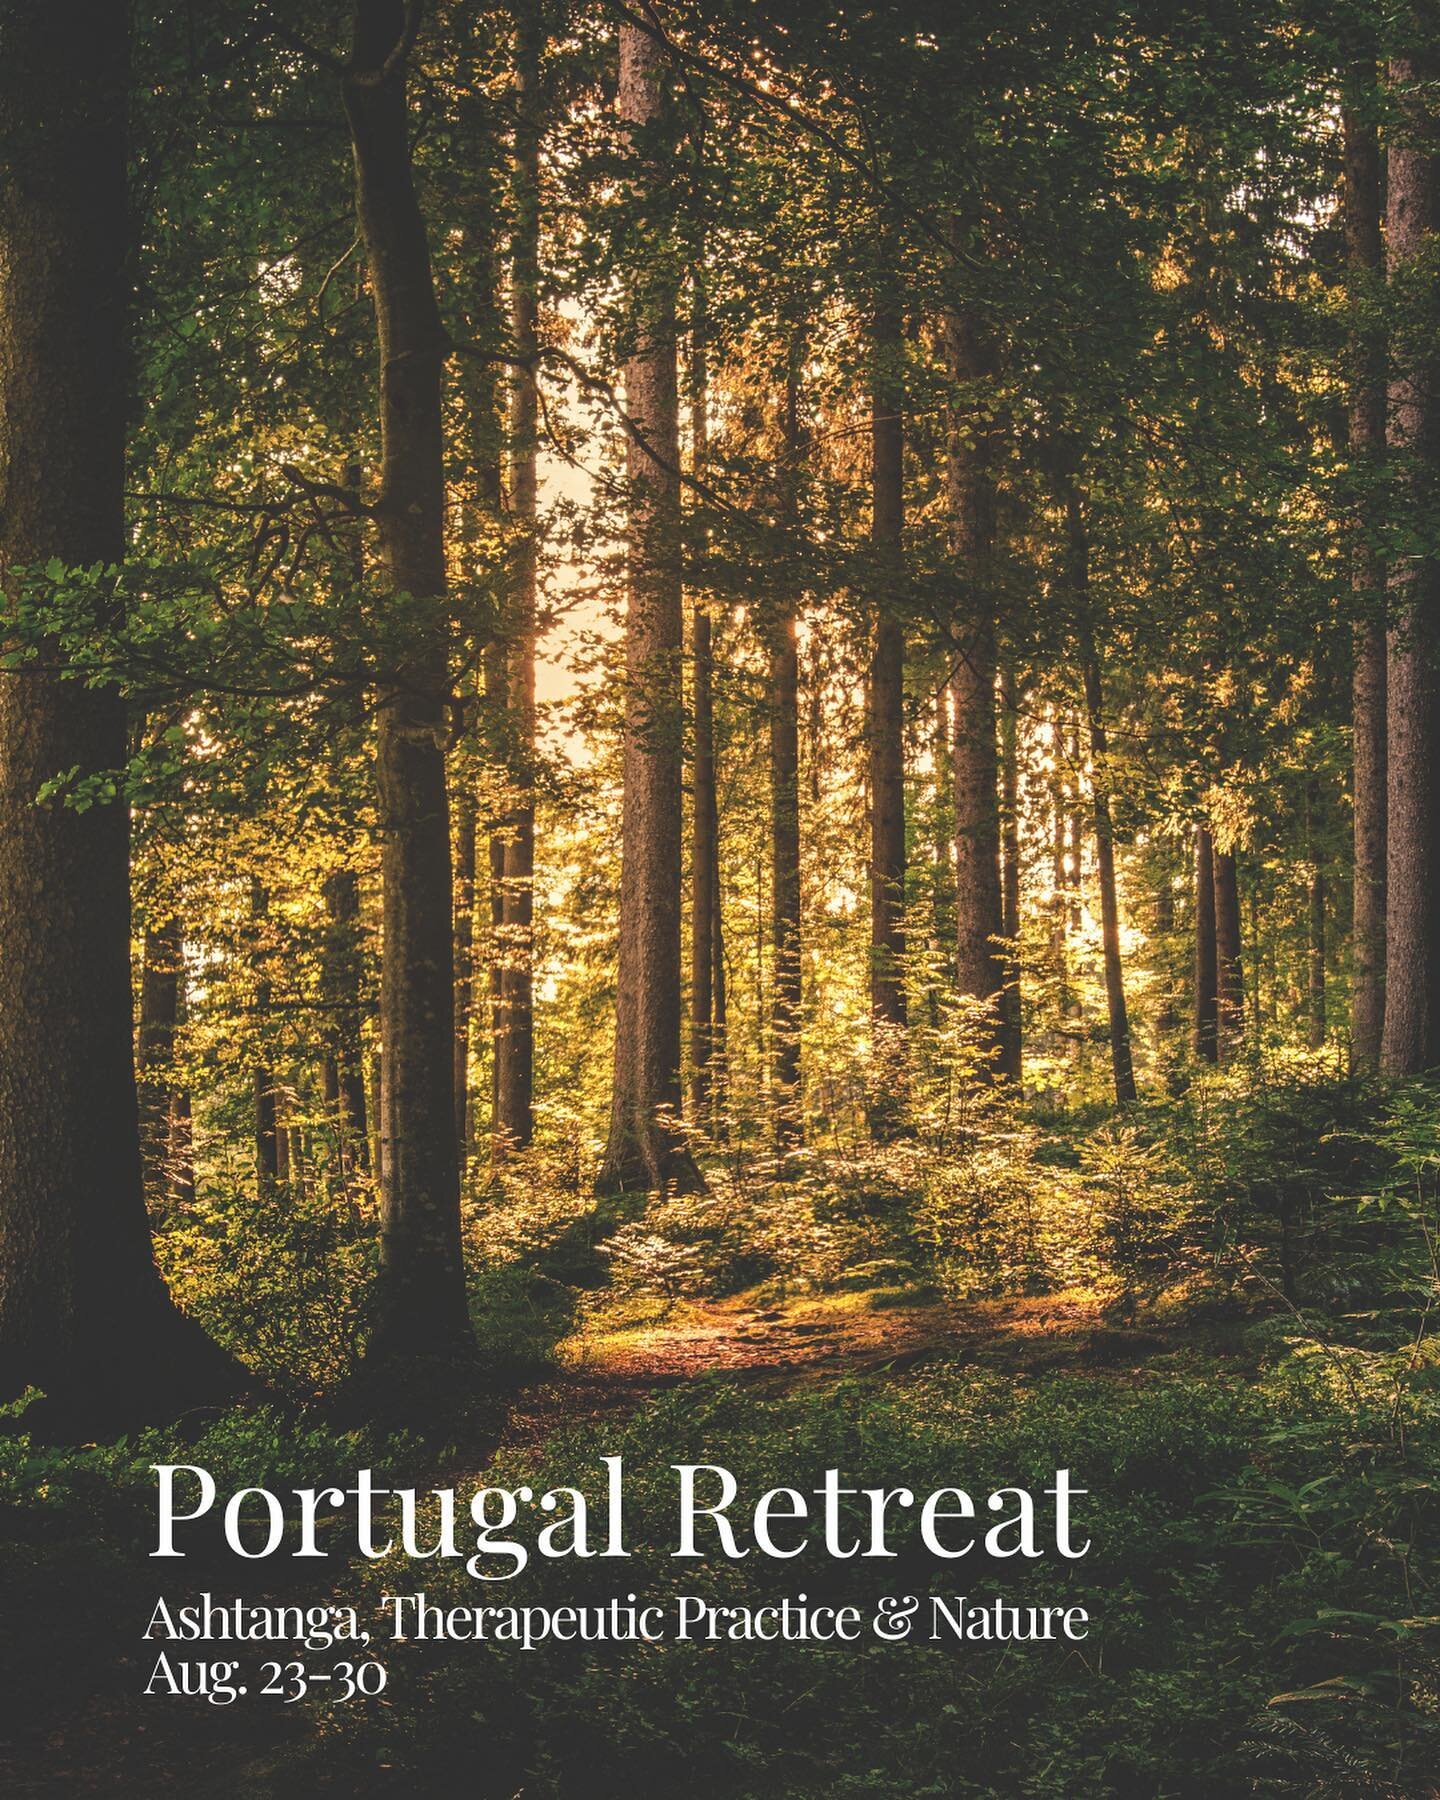 Join me and @leniandyoga this summer in Portugal for a week of Ashtanga yoga, practicing in a way that supports what&rsquo;s uniquely present for you. All while being immersed in nature, allowing our experiences to inspire and energize us from this i